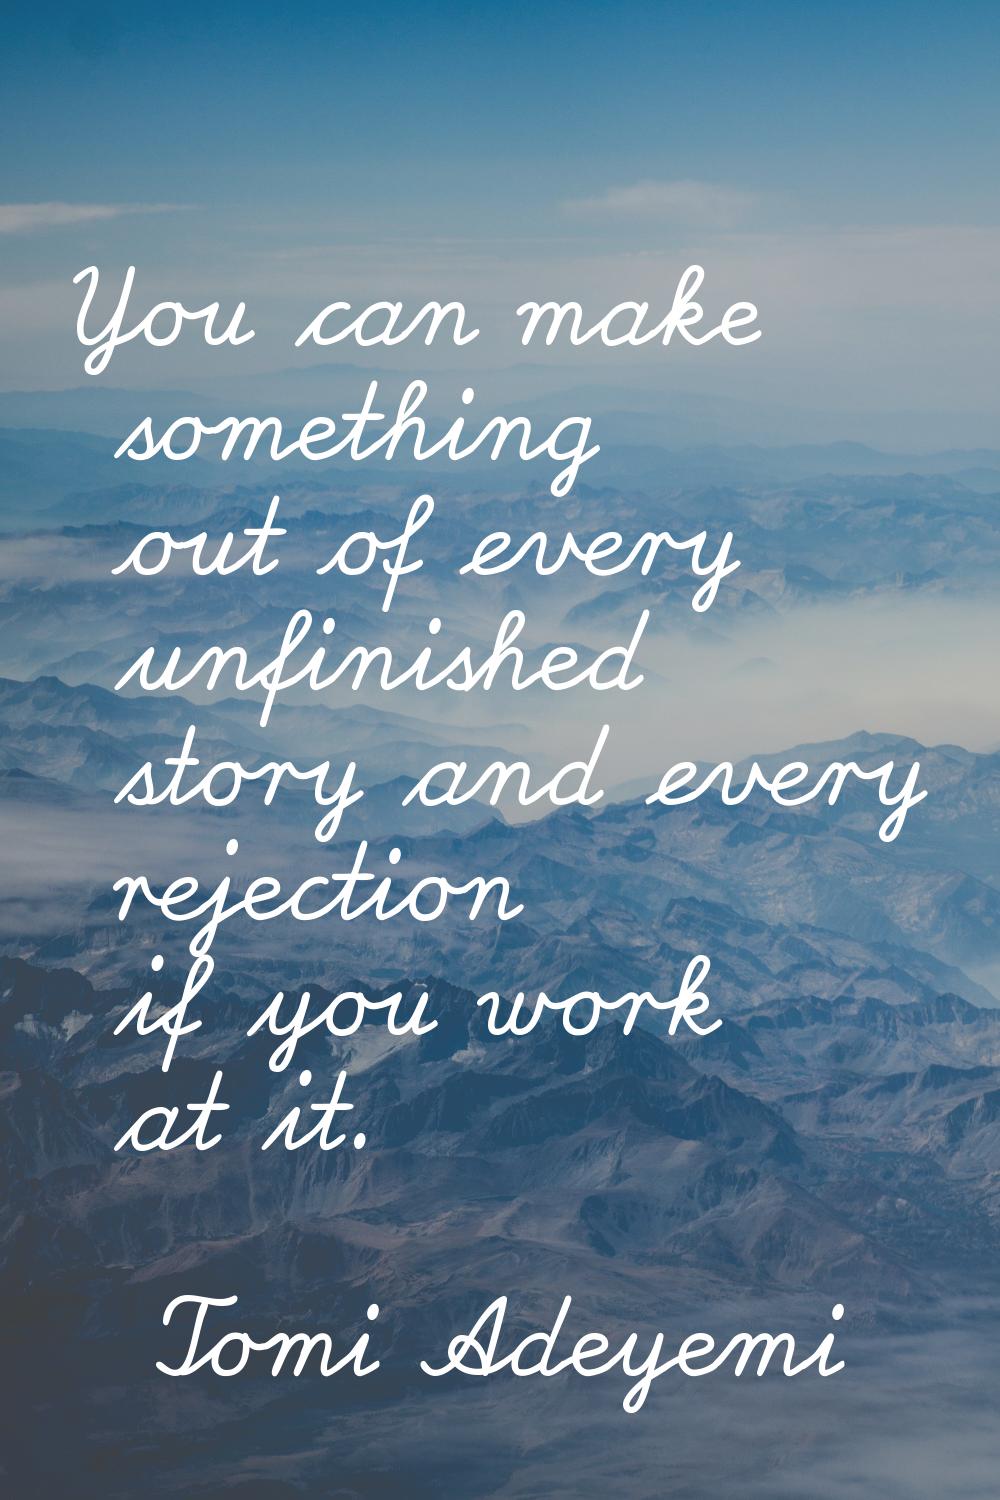 You can make something out of every unfinished story and every rejection if you work at it.